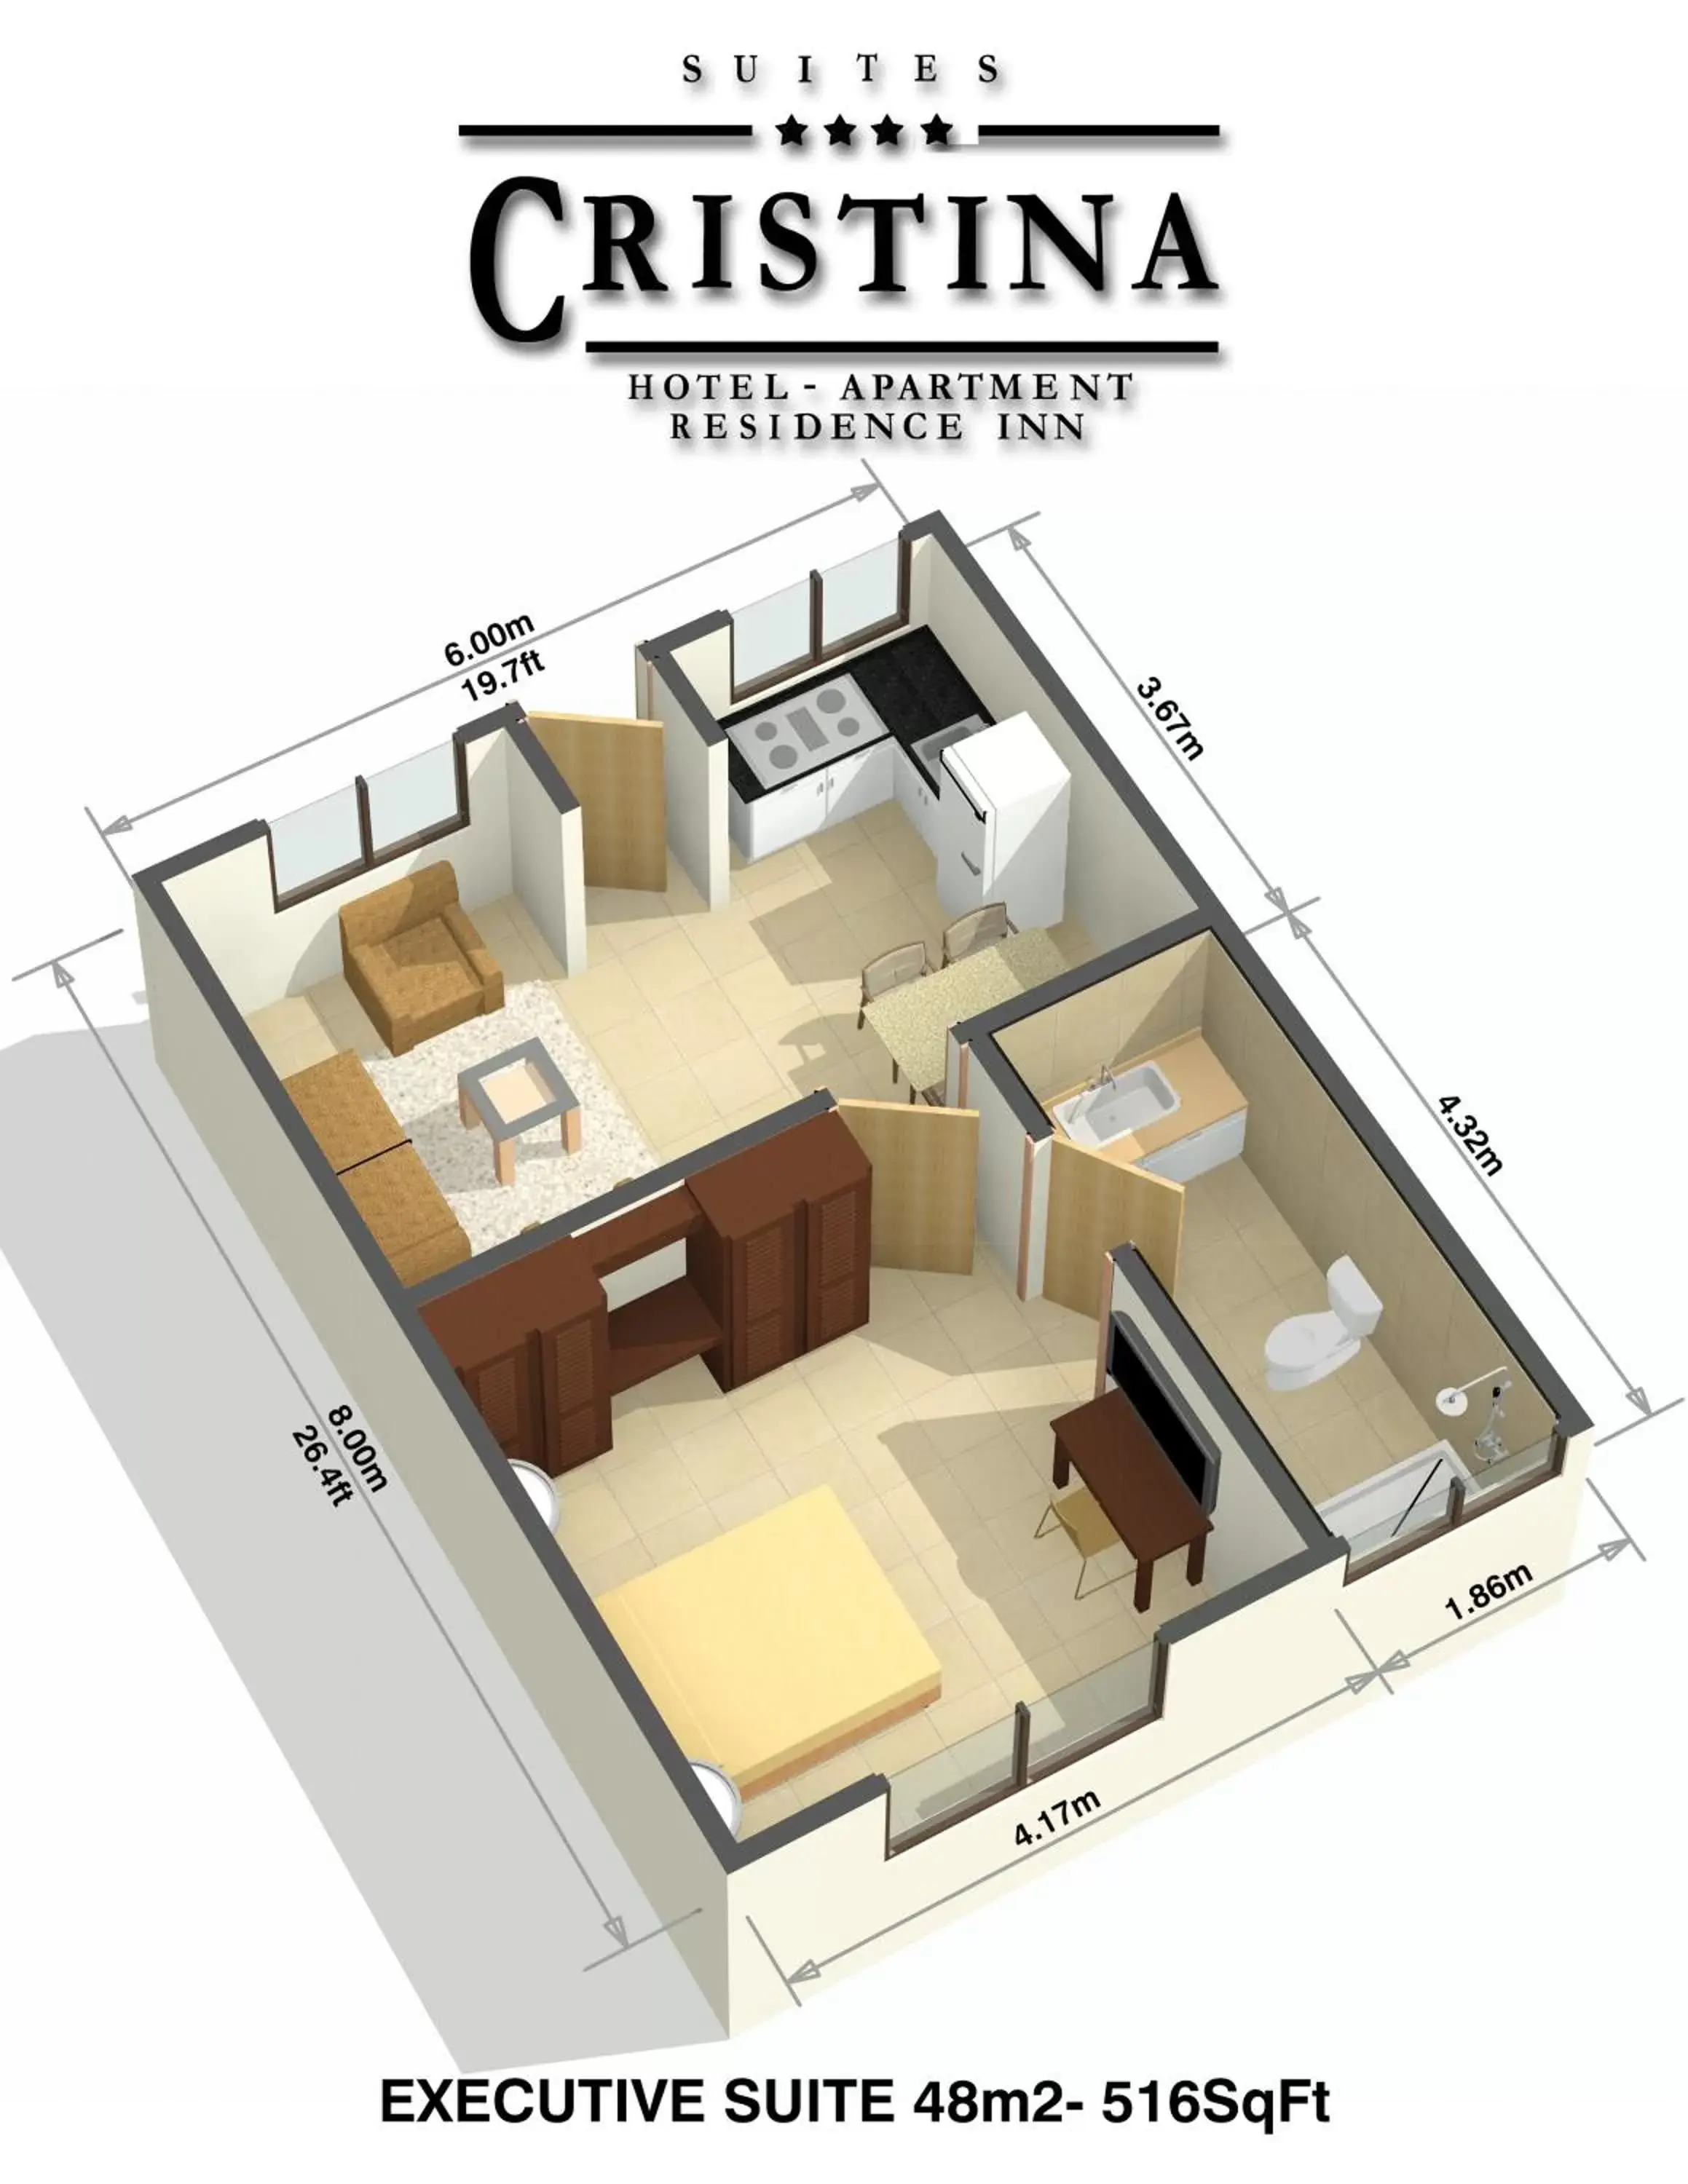 Photo of the whole room, Floor Plan in Hotel Residence Inn Suites Cristina